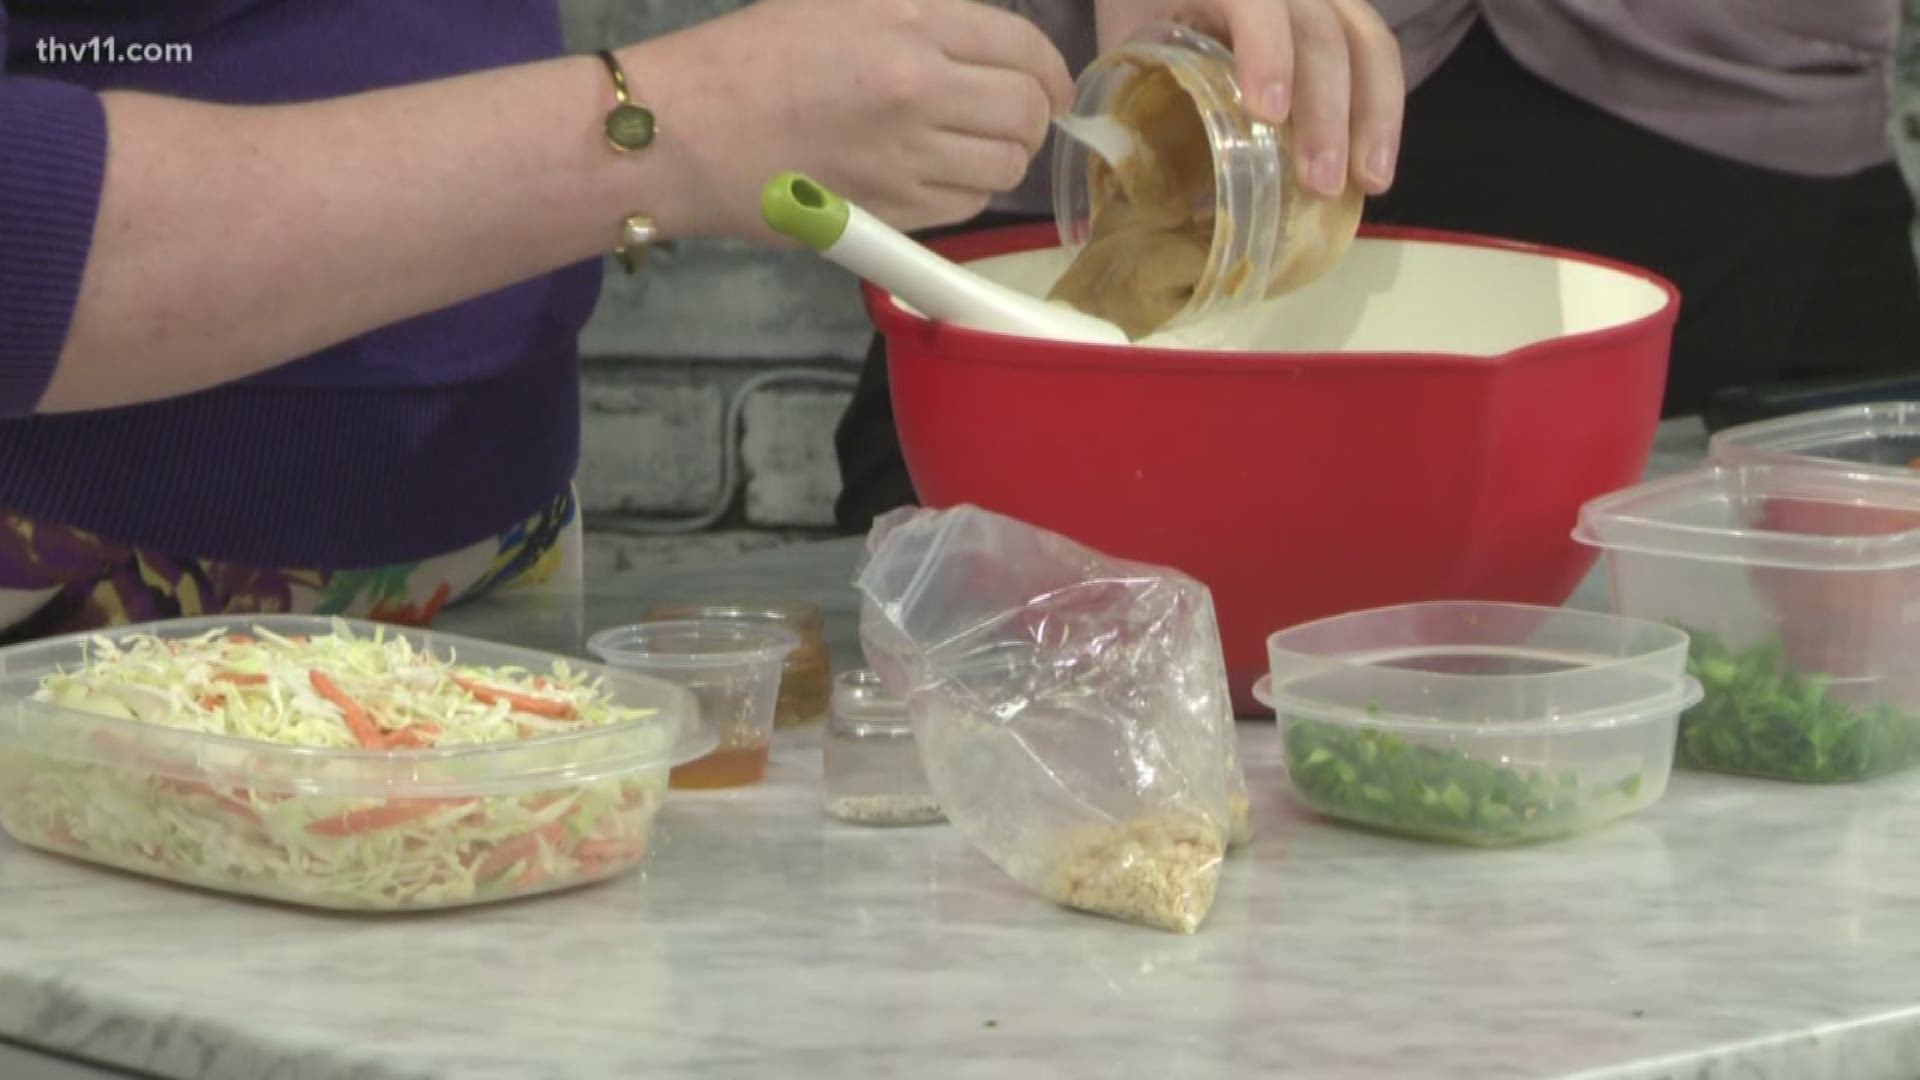 Try this quick and inexpensive recipe from the American Heart Association